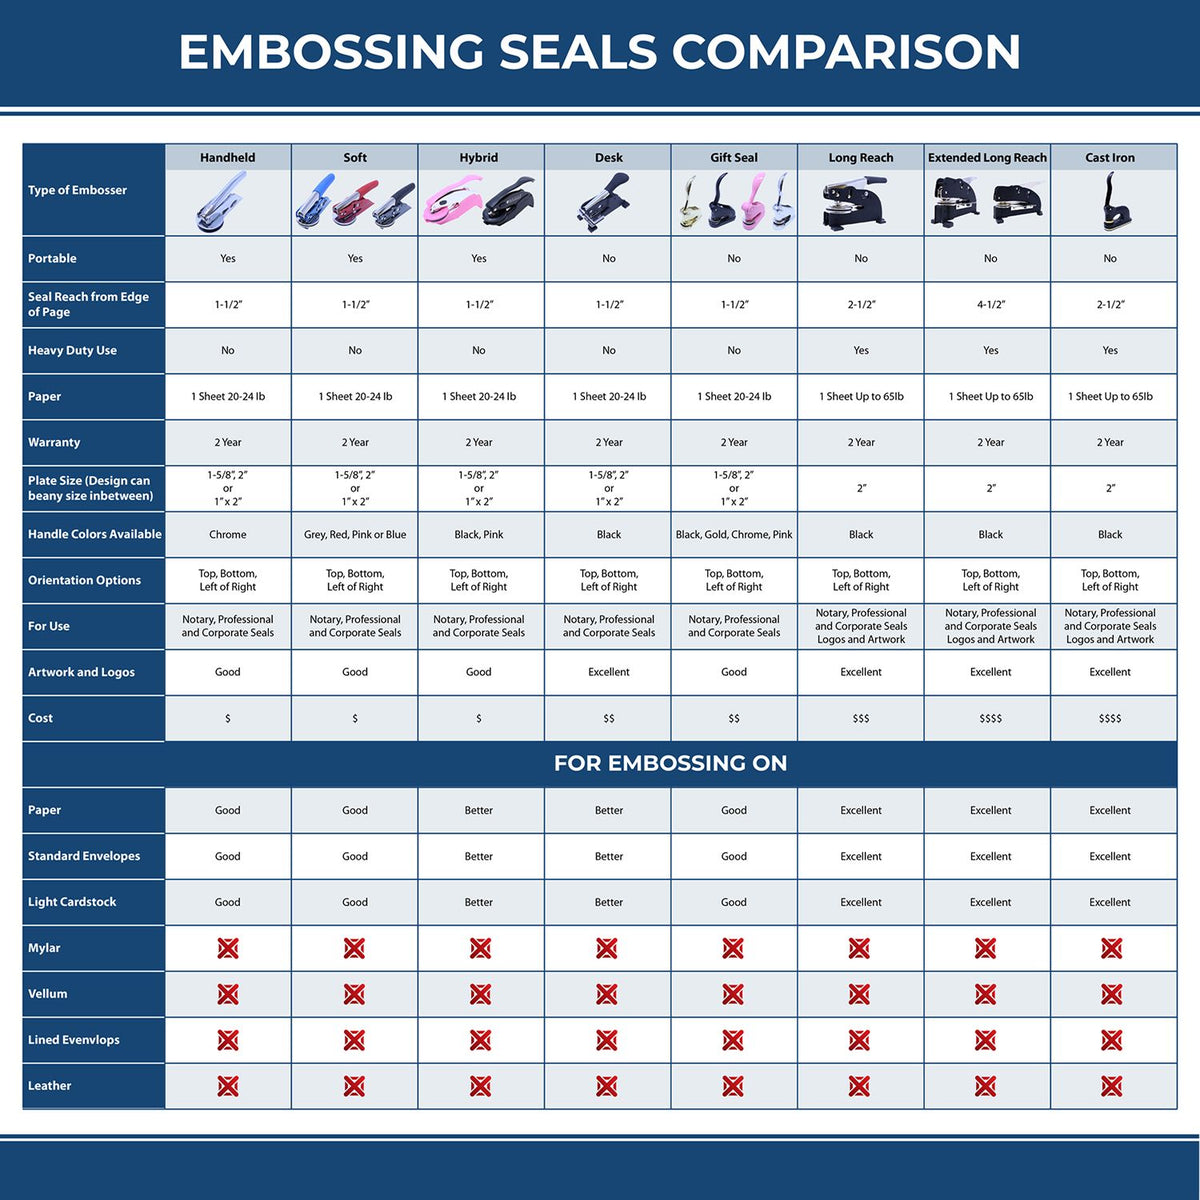 A comparison chart for the different types of mount models available for the State of Idaho Soft Land Surveyor Embossing Seal.